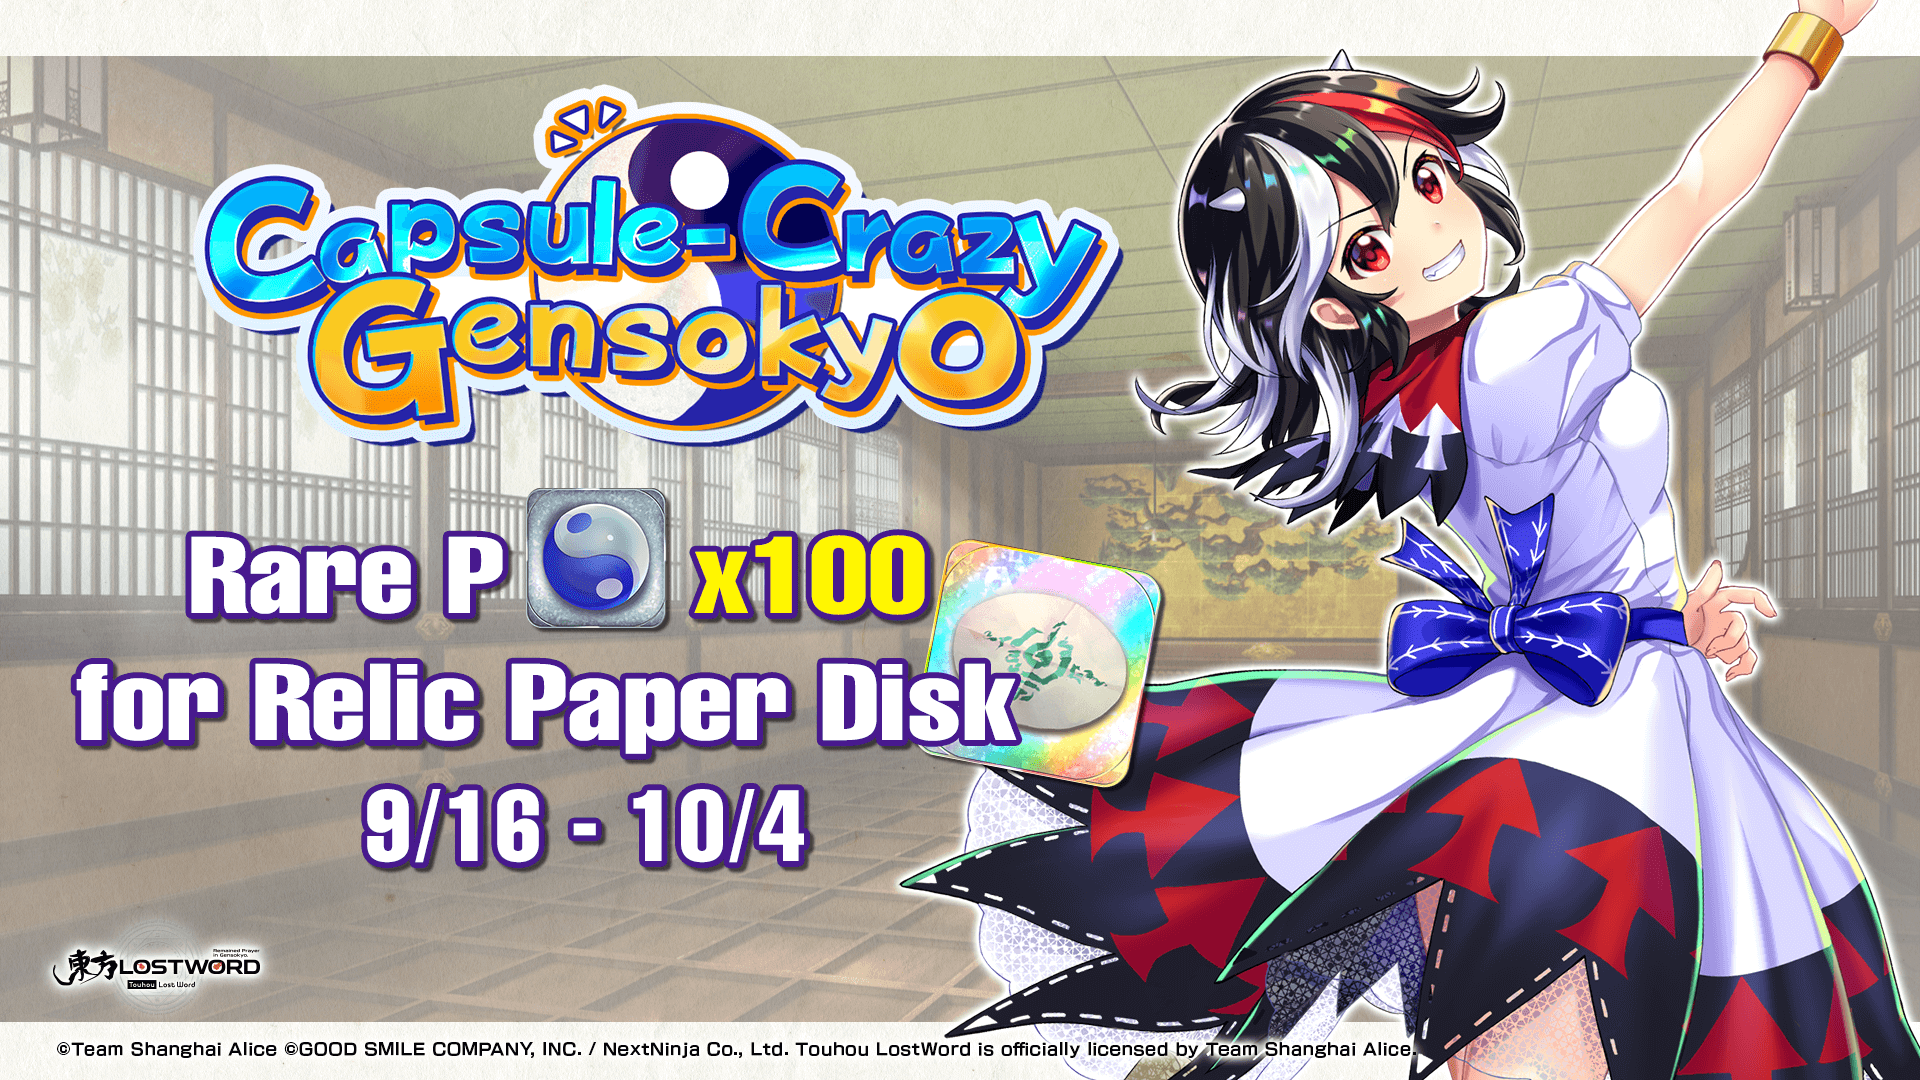 The Relic Paper Disk is available once more for 100 Rare P! Be sure to snag this deal to upgrade your MV Friends.